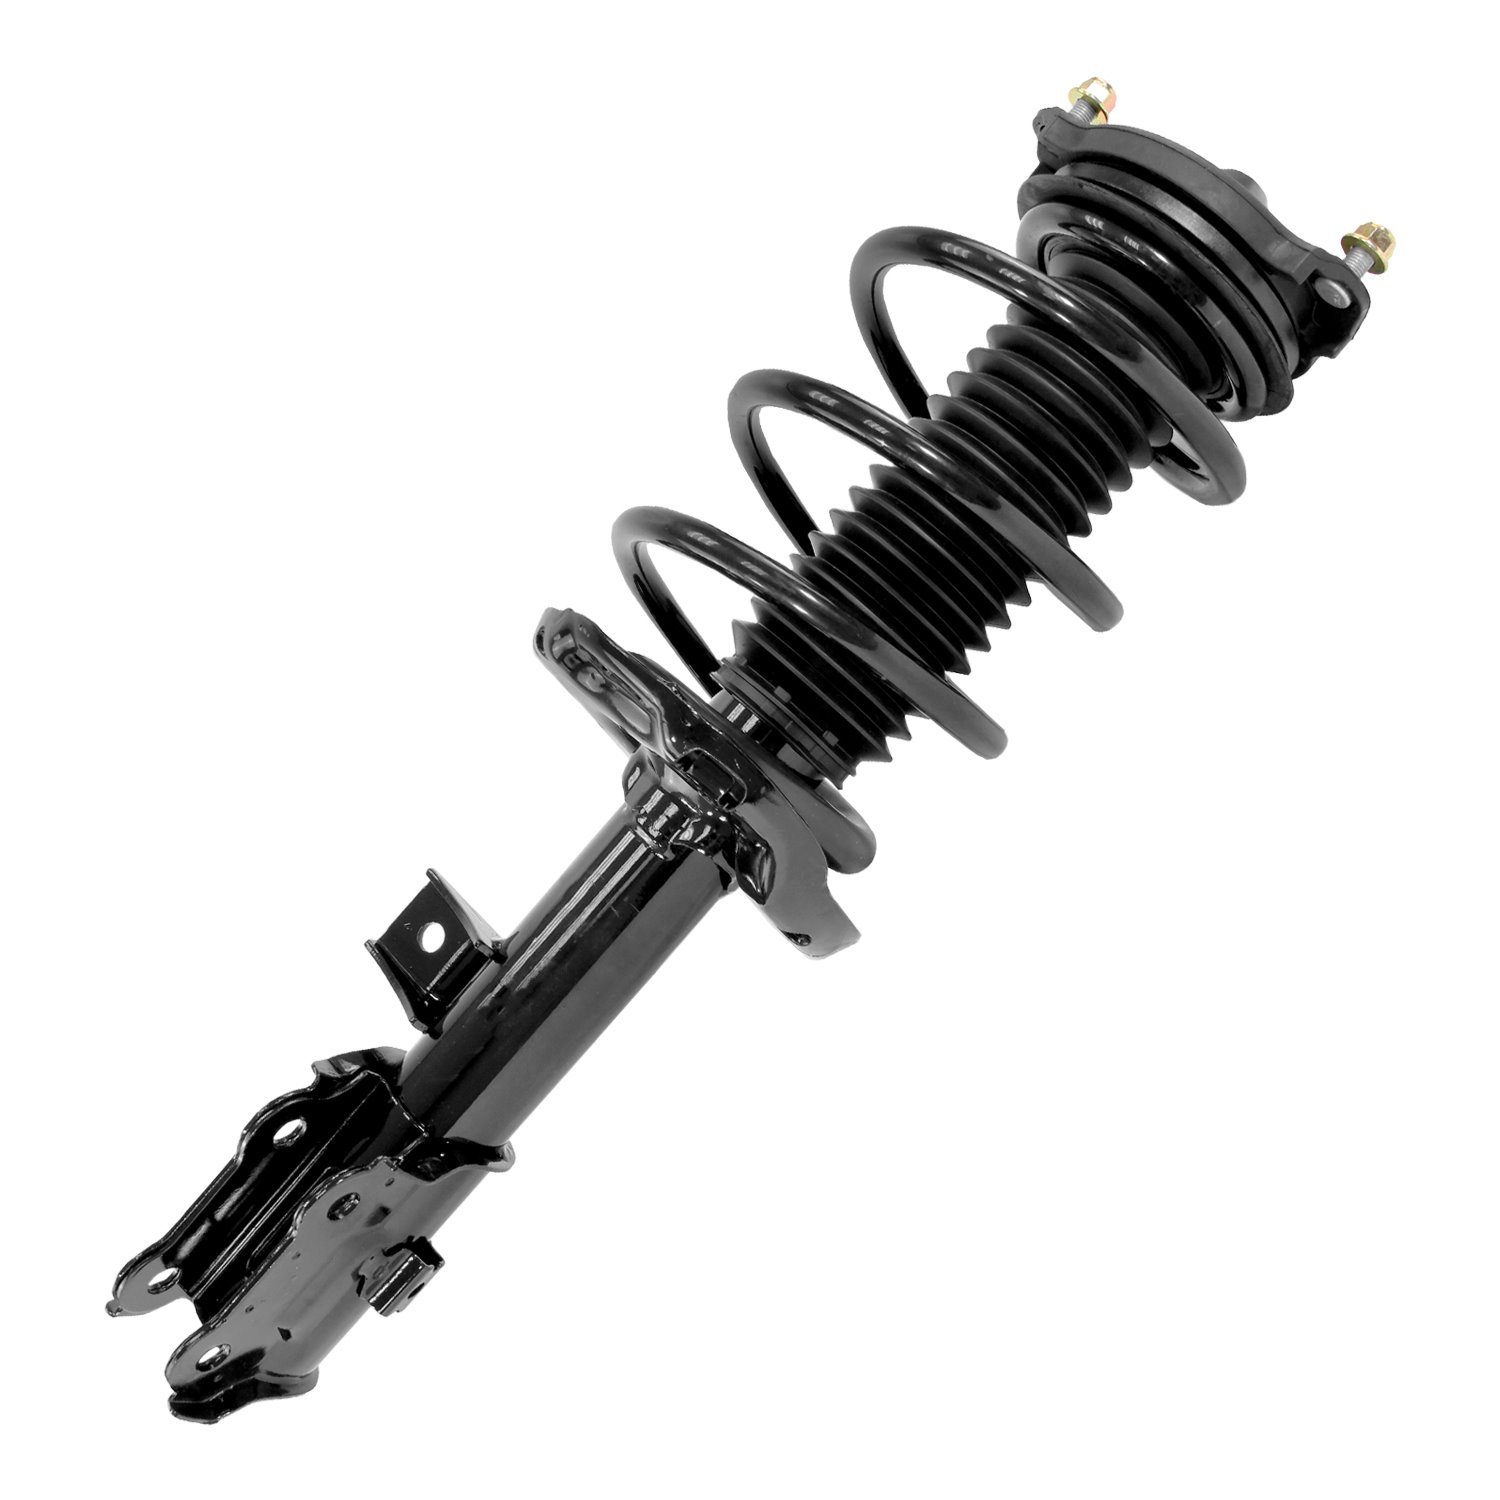 13011 Front Suspension Strut & Coil Spring Assemby Fits Select Kia Sportage, Hyundai Tucson